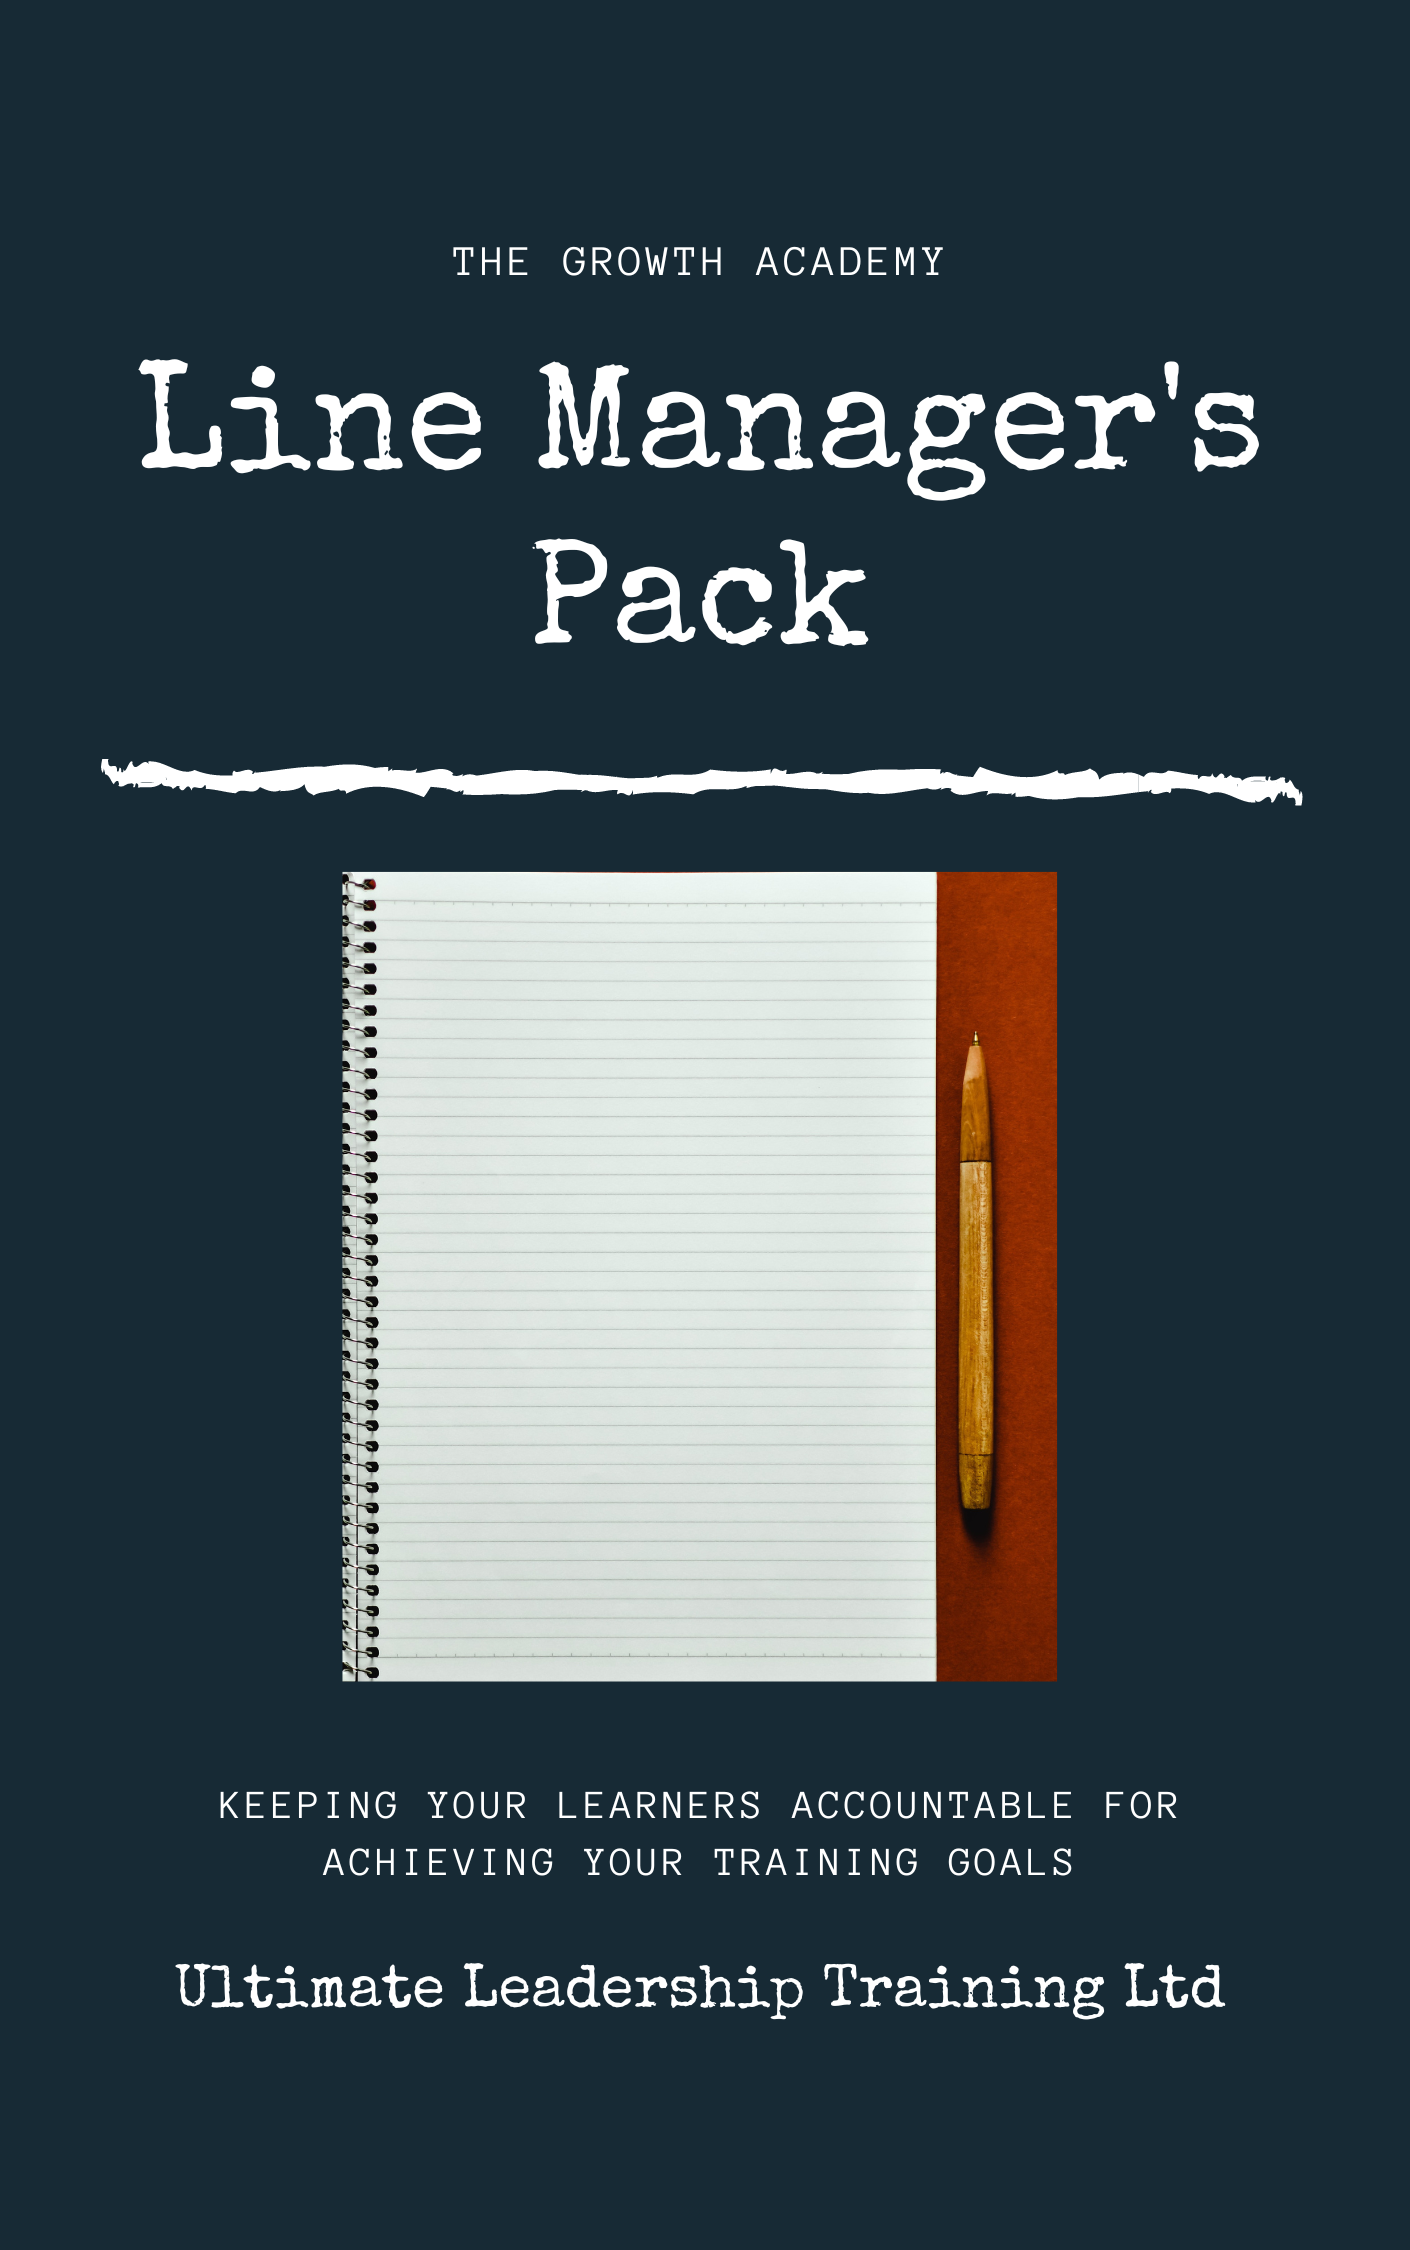 The line managers growth and accountability pack